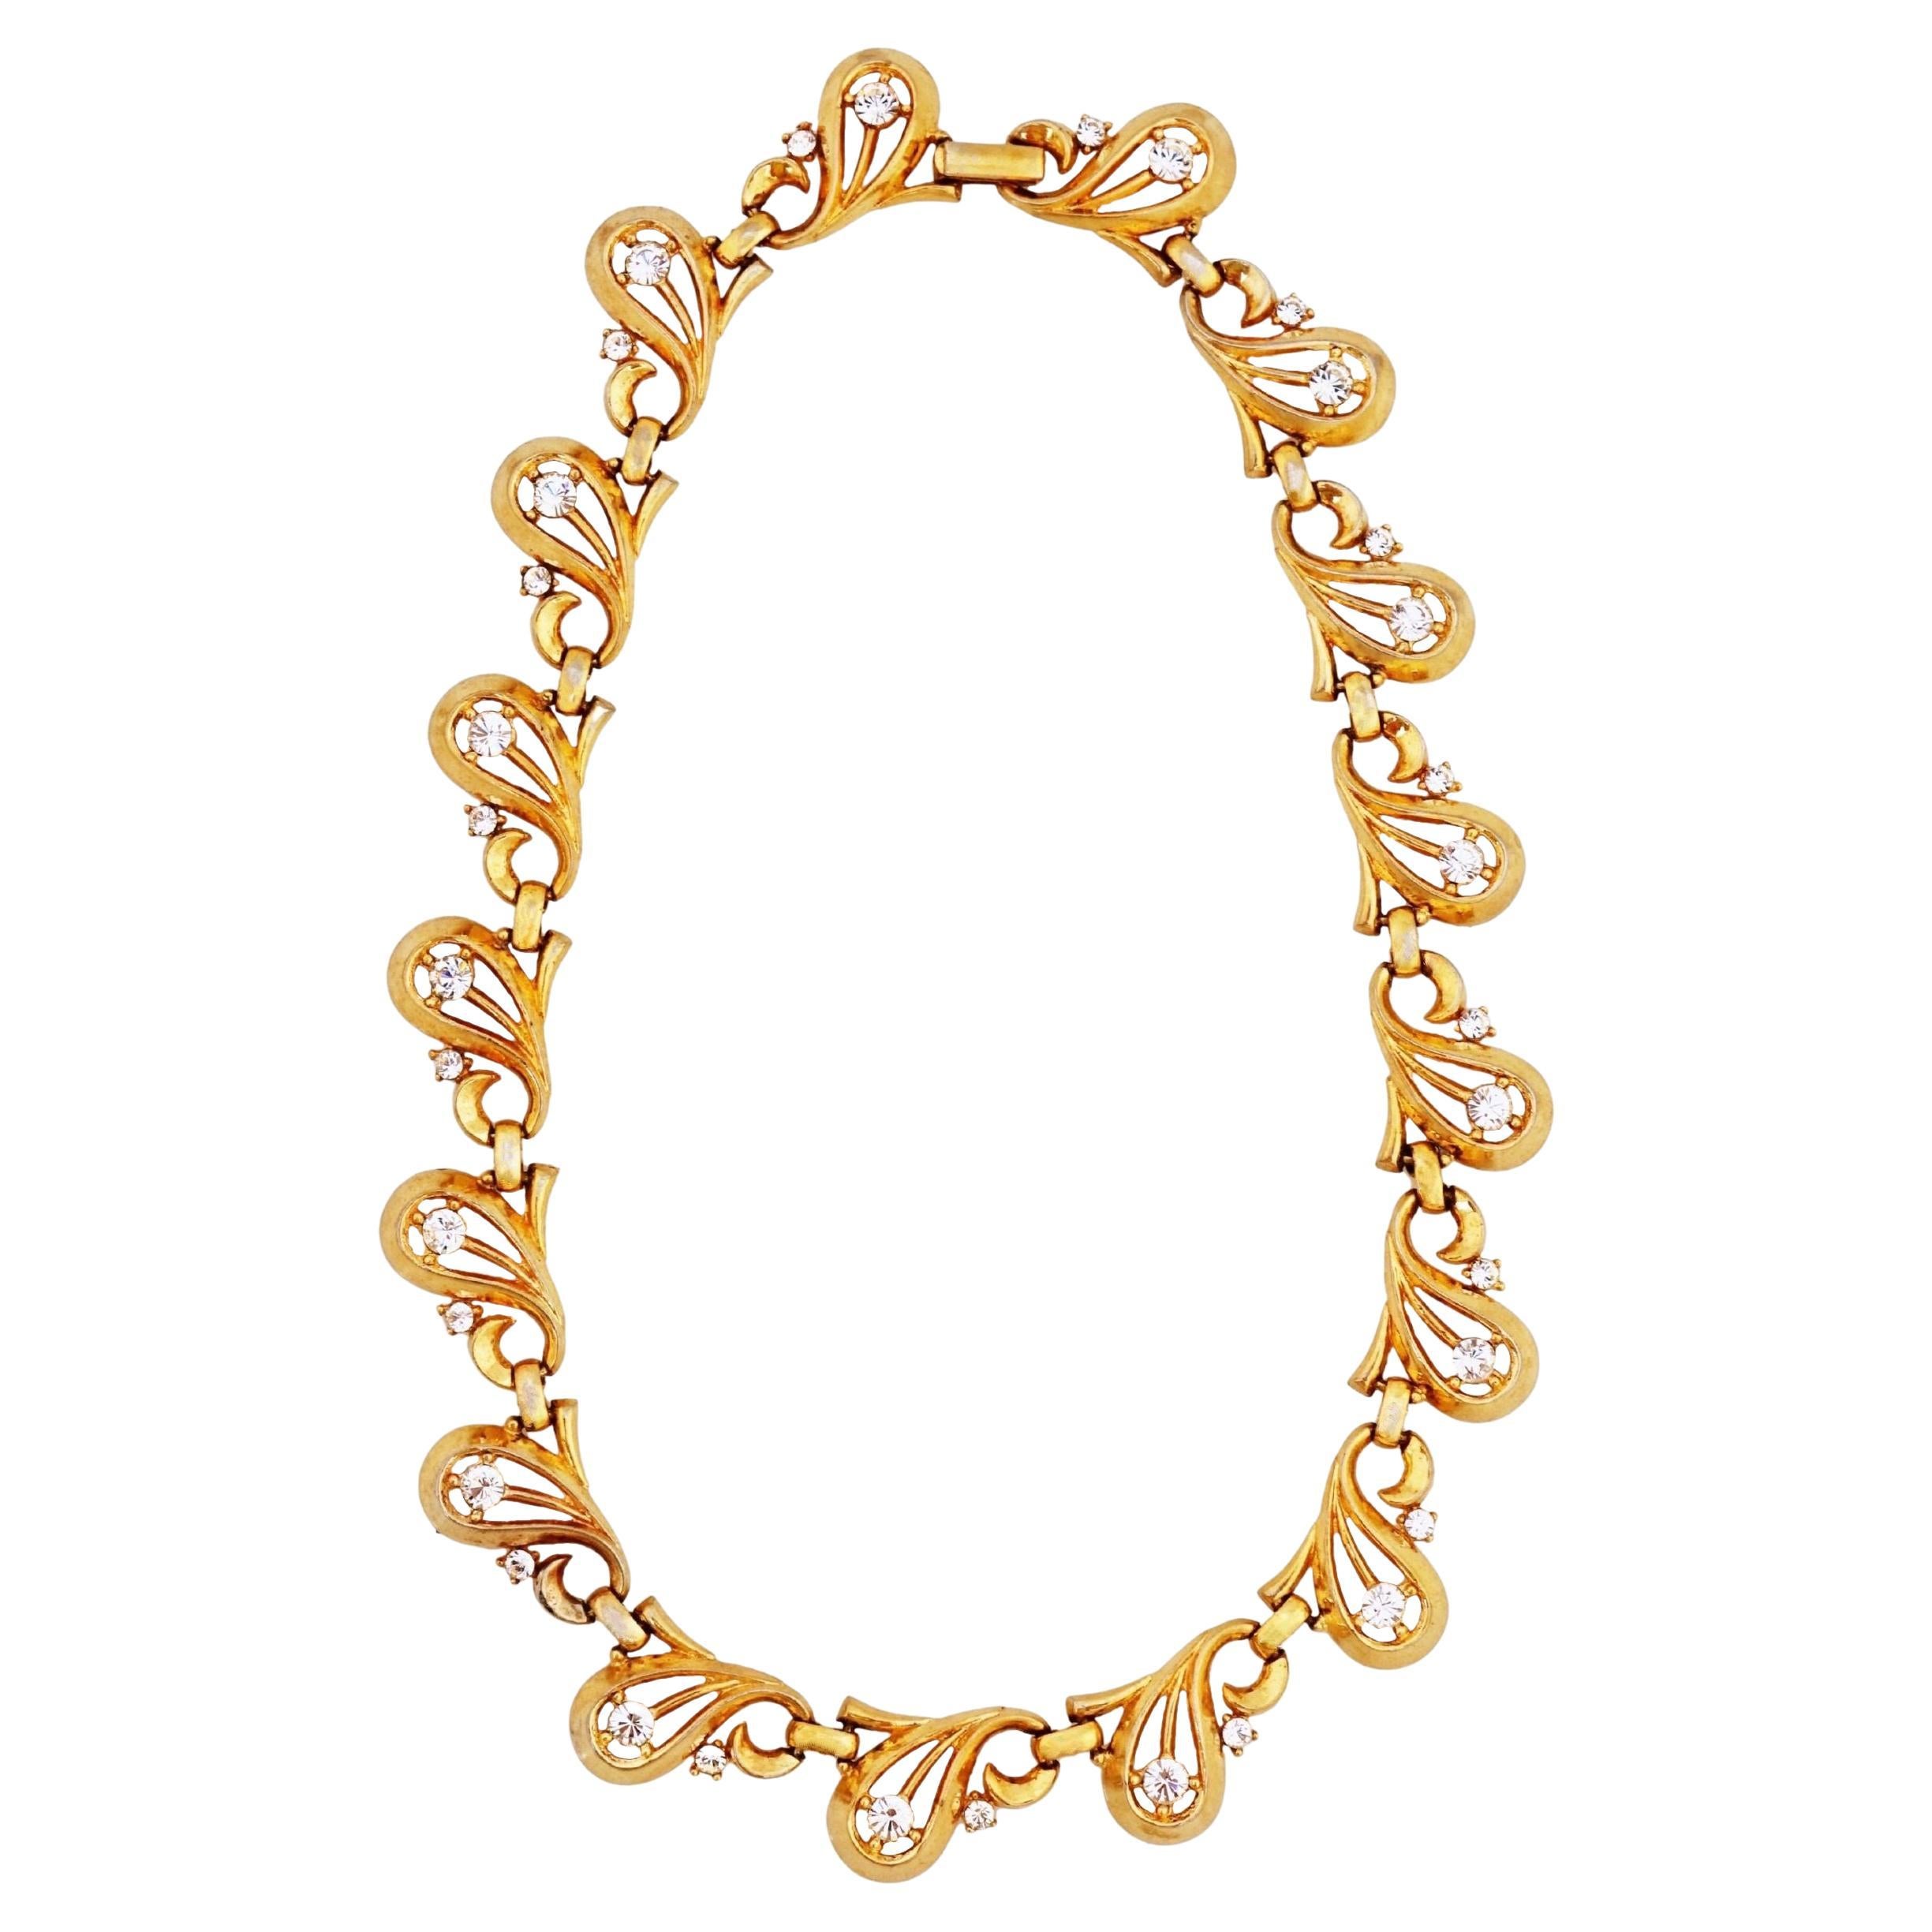 1940s Art Nouveau Teardrop Link Choker Necklace By Alfred Philippe For Trifari